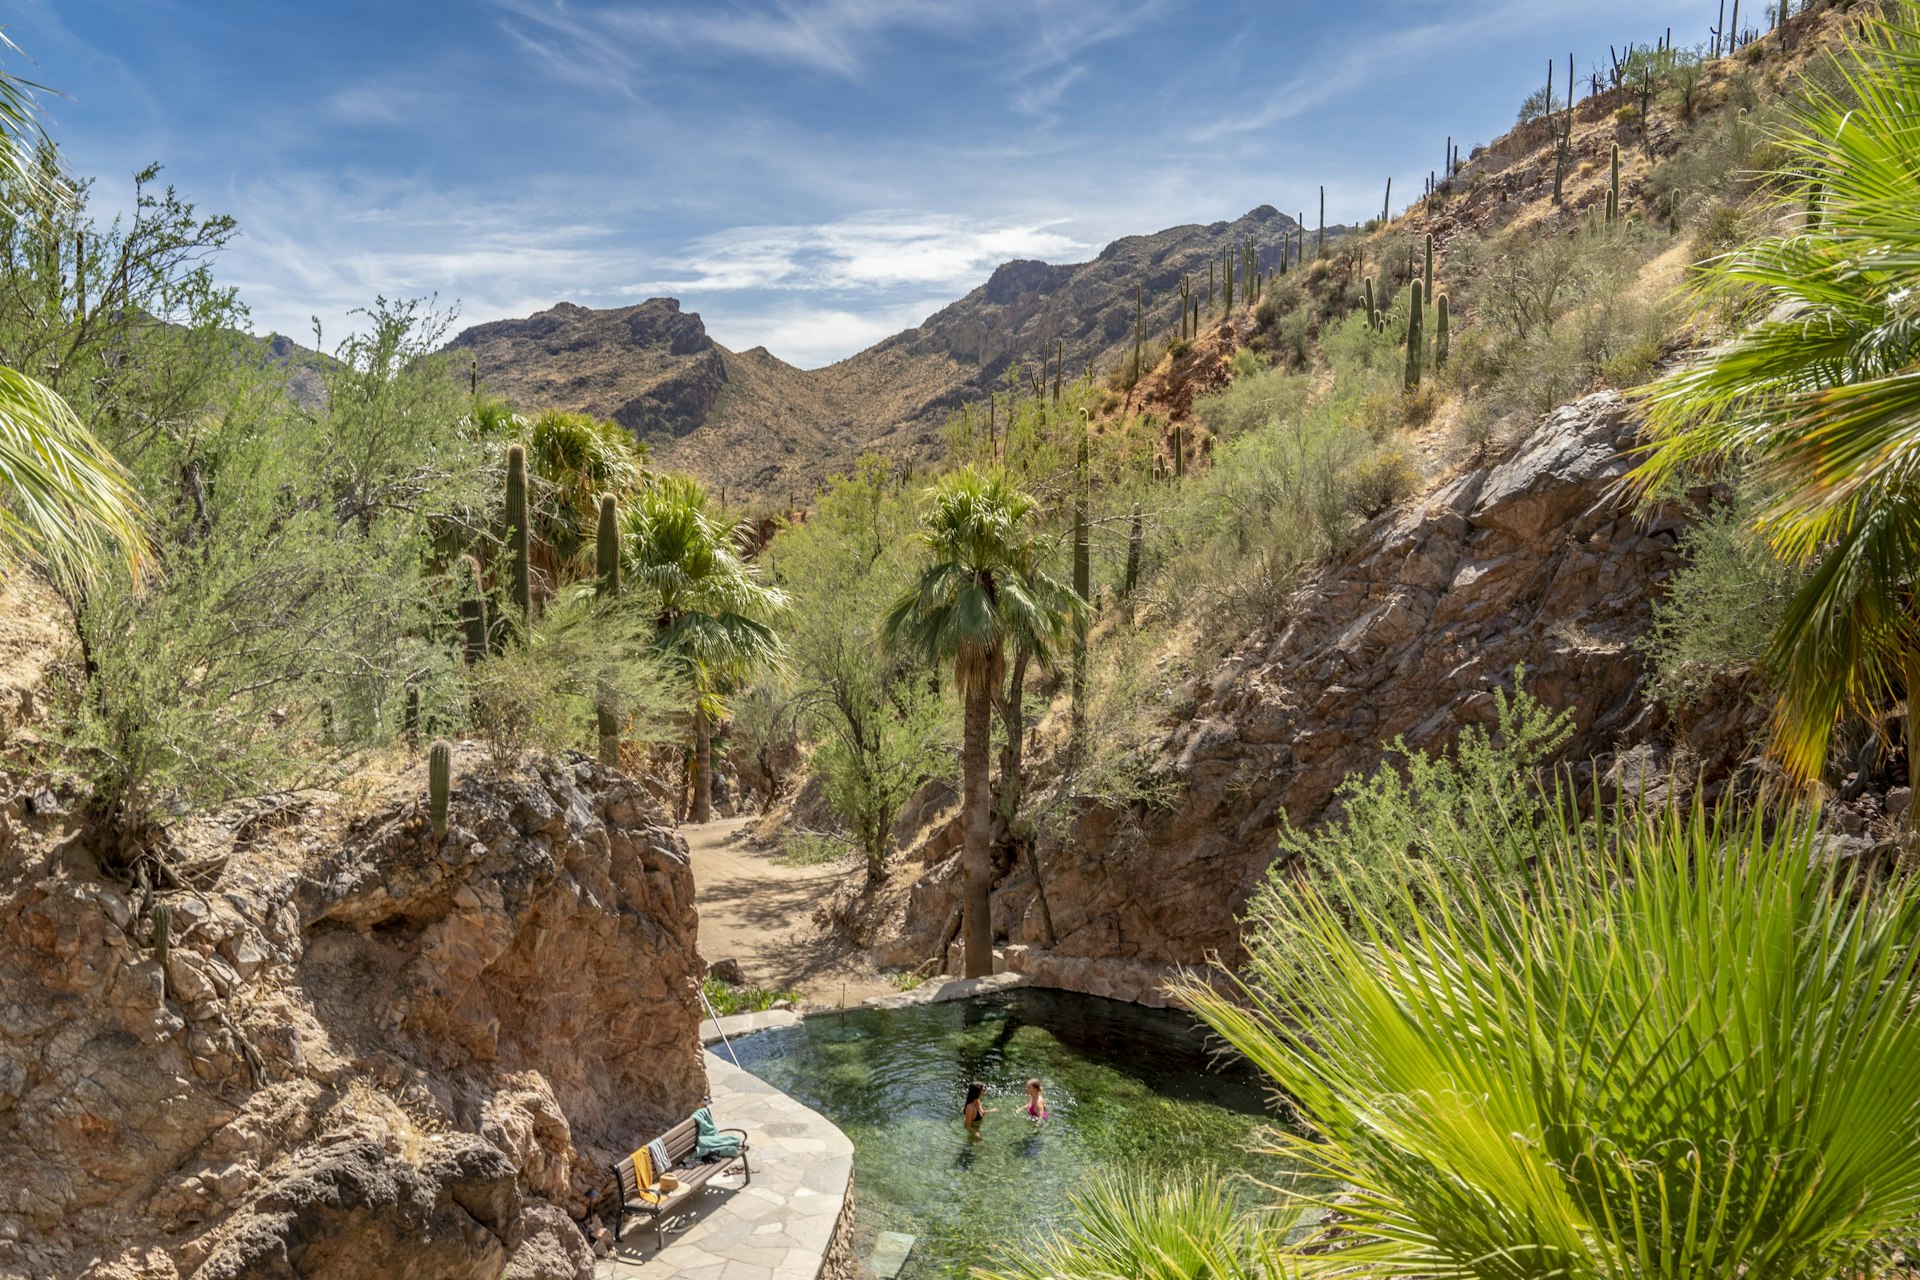 Two people in a hot spring set in a desert canyon landscape in Castle Hot Springs, Arizona, USA